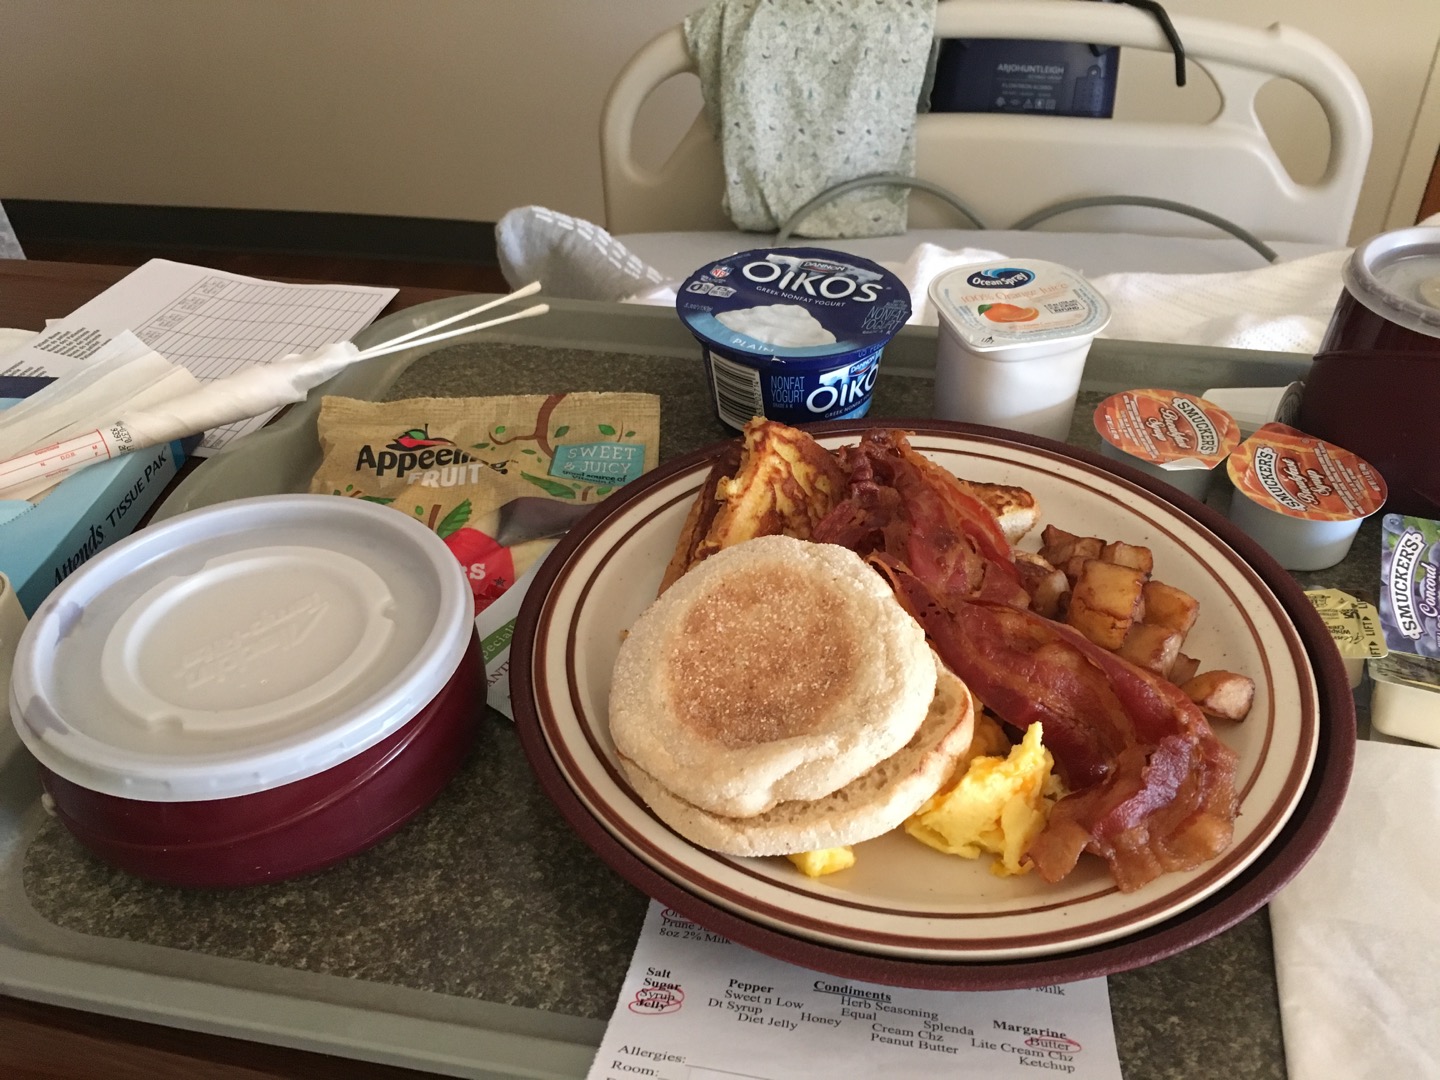 Scrambled eggs with cheese, french toast, bacon, english muffin, oatmeal, apple slices, plain greek yogurt. I didn't eat all of this, but just a little bit of each. 